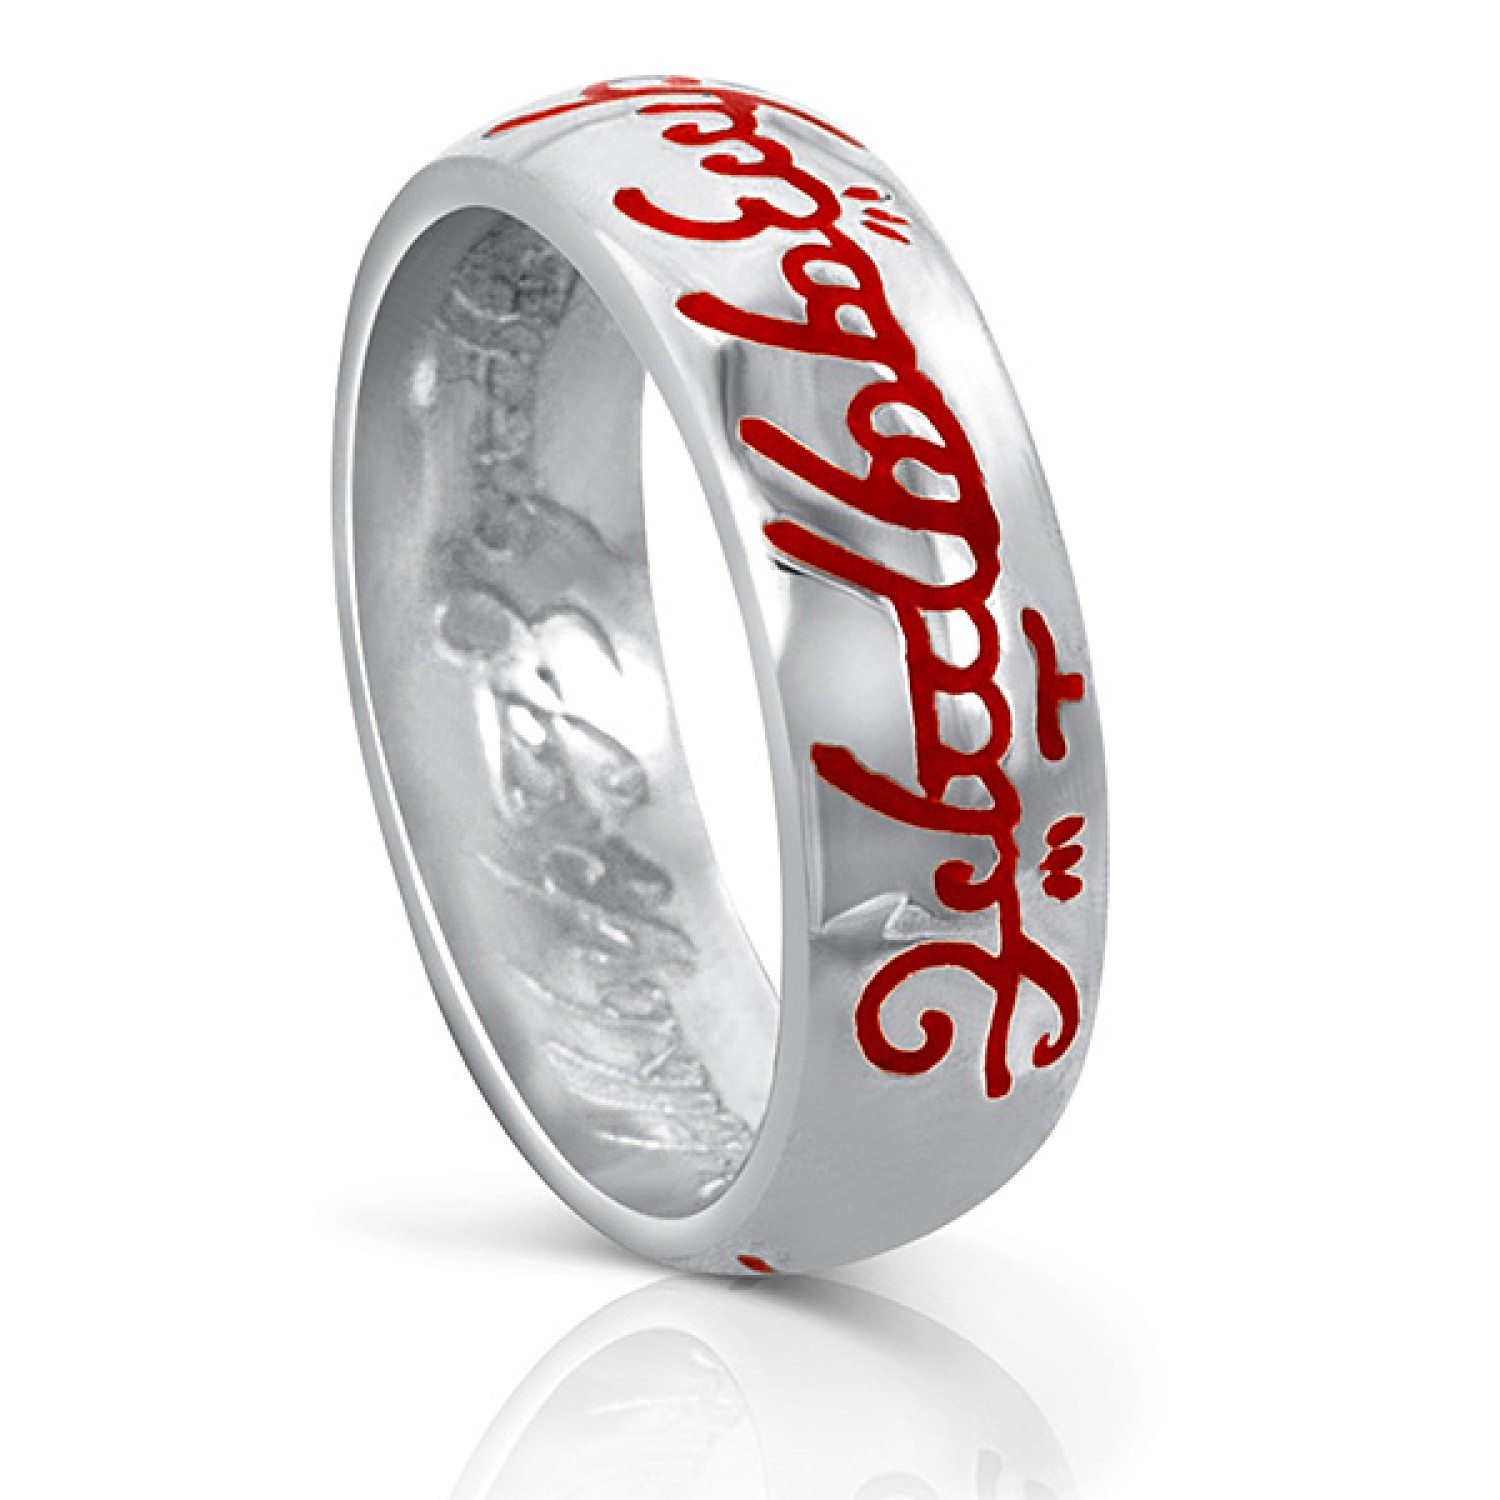 Lord Of The Rings  The One Ring Red Script. One ring to rule them all,One ring to find them,One ring to bring them all and in the darkness bind them. Engraved with Elvish Runes filled with a red resin that glows under ultra violet light. The only Official